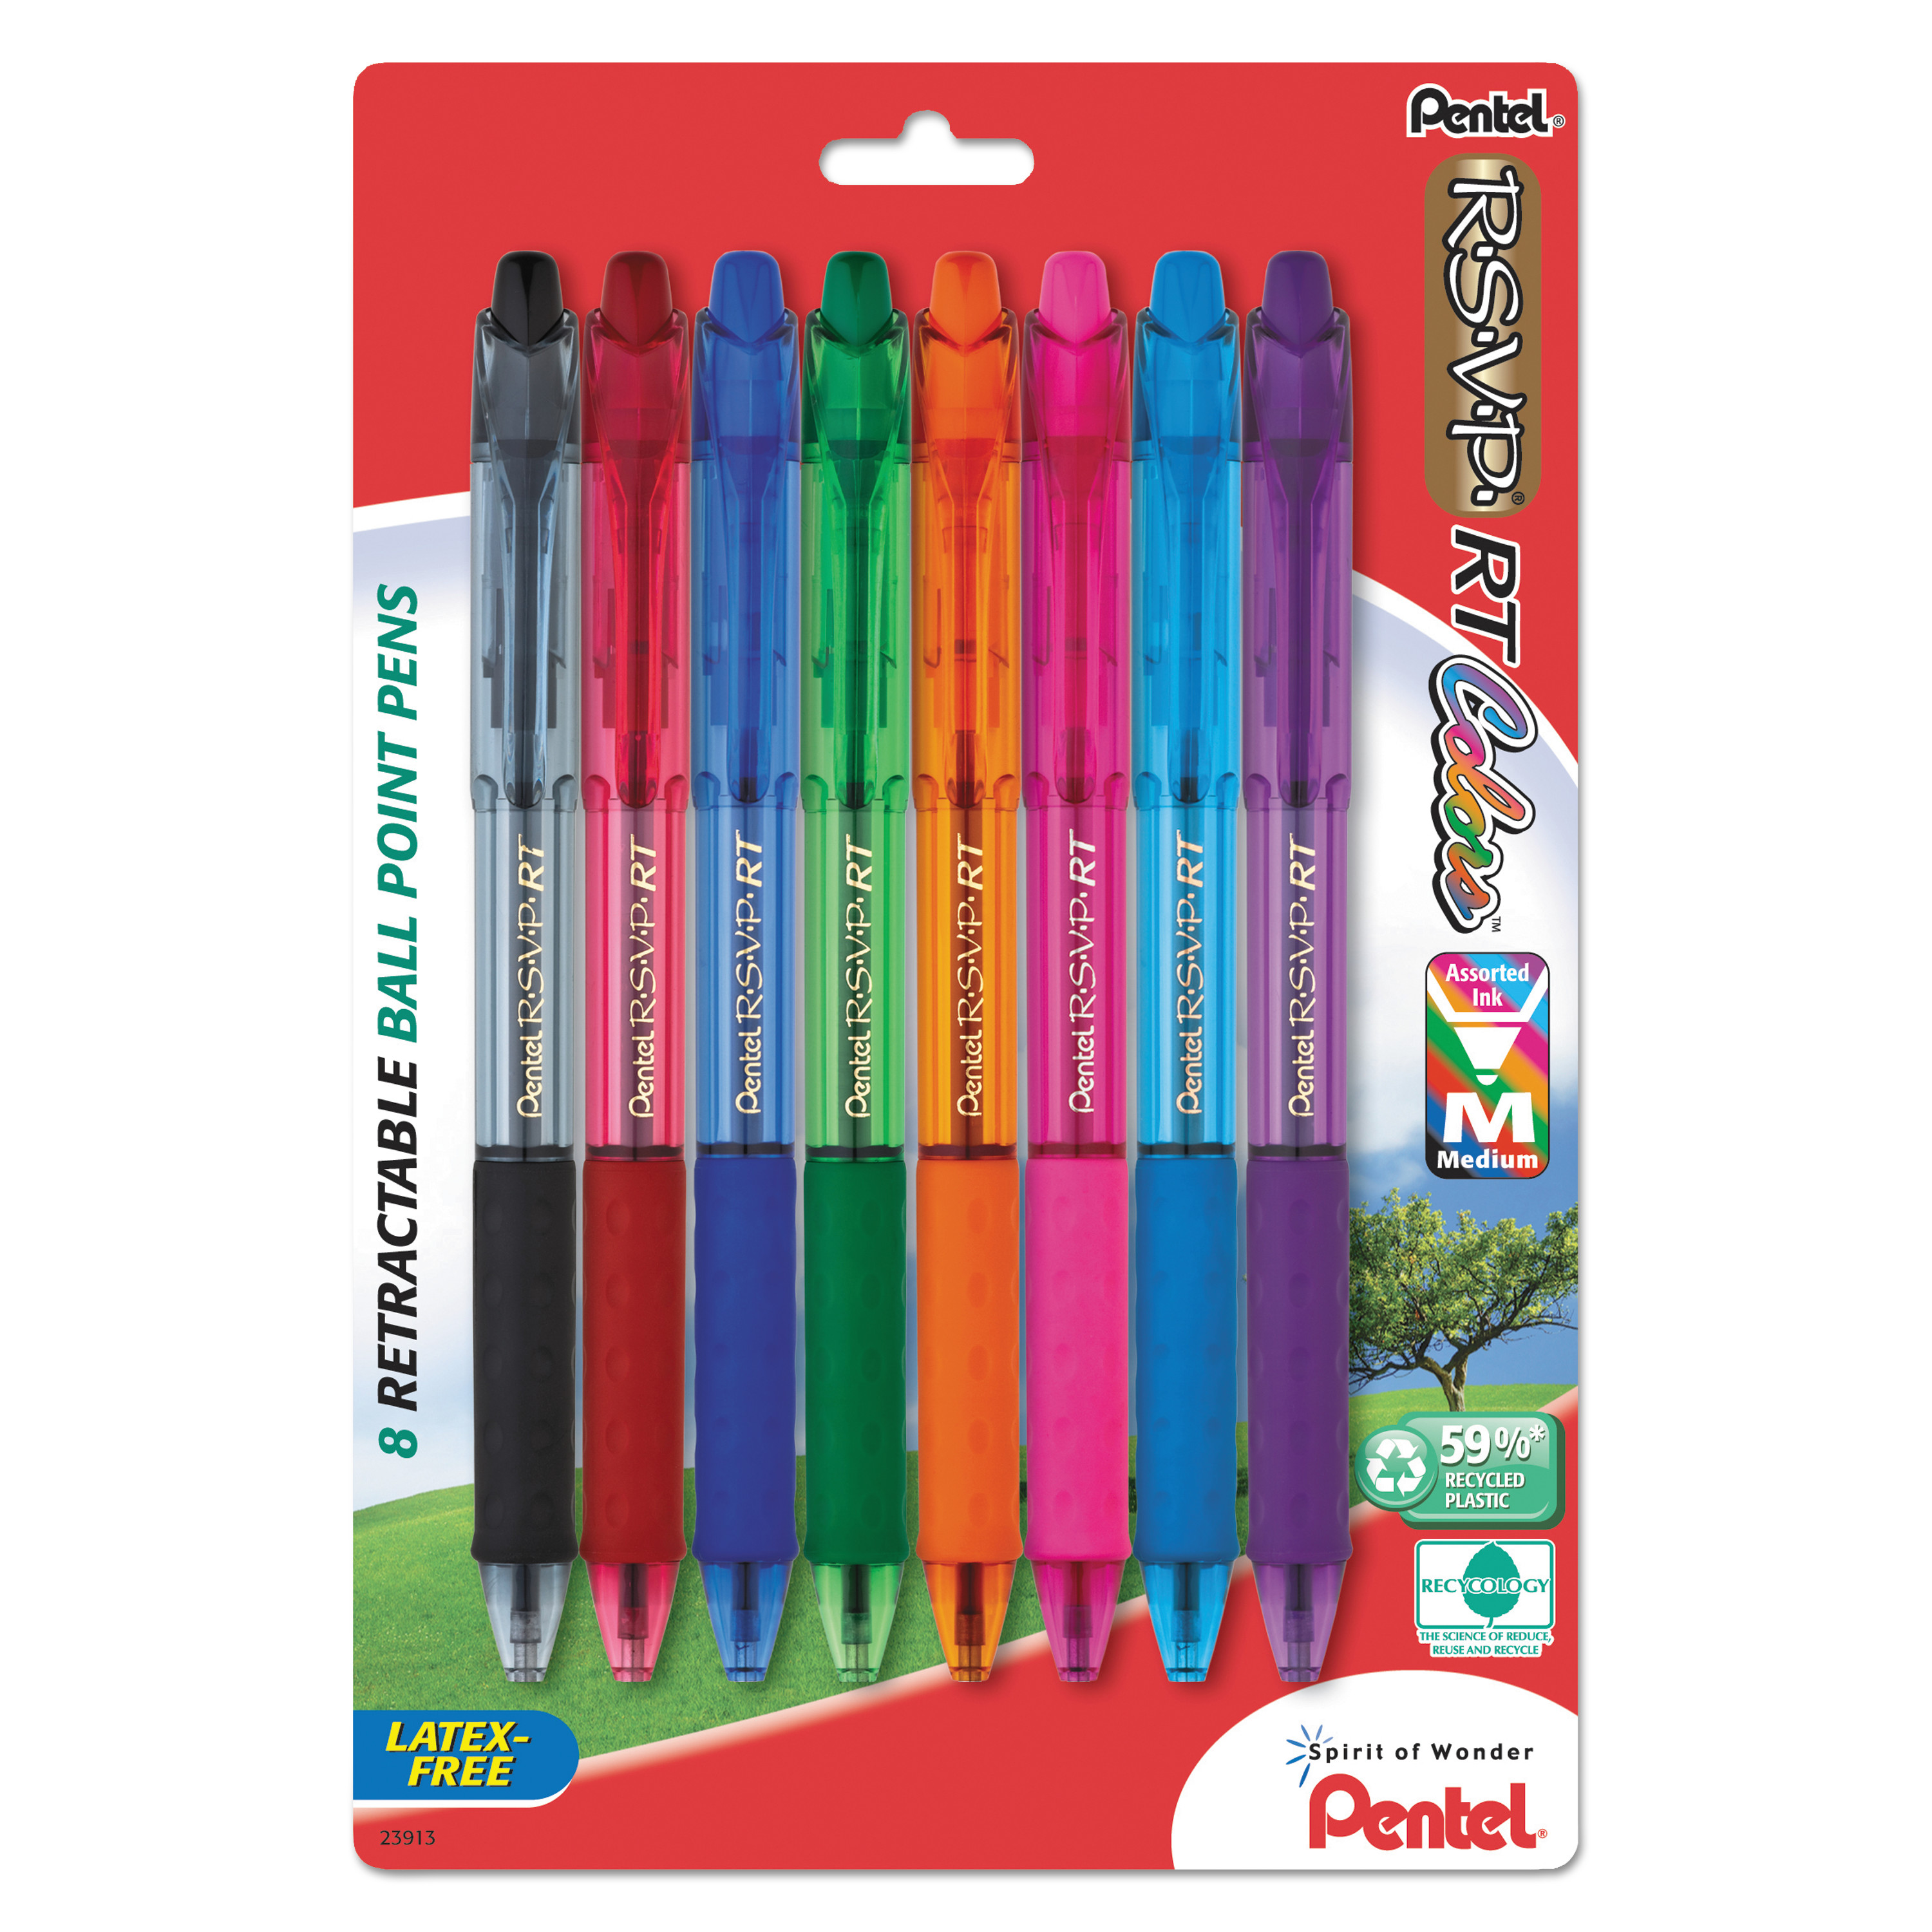 R.S.V.P. RT Retractable Ballpoint Pen, 1mm, Clear Barrel, Assorted Ink, 8/Pack